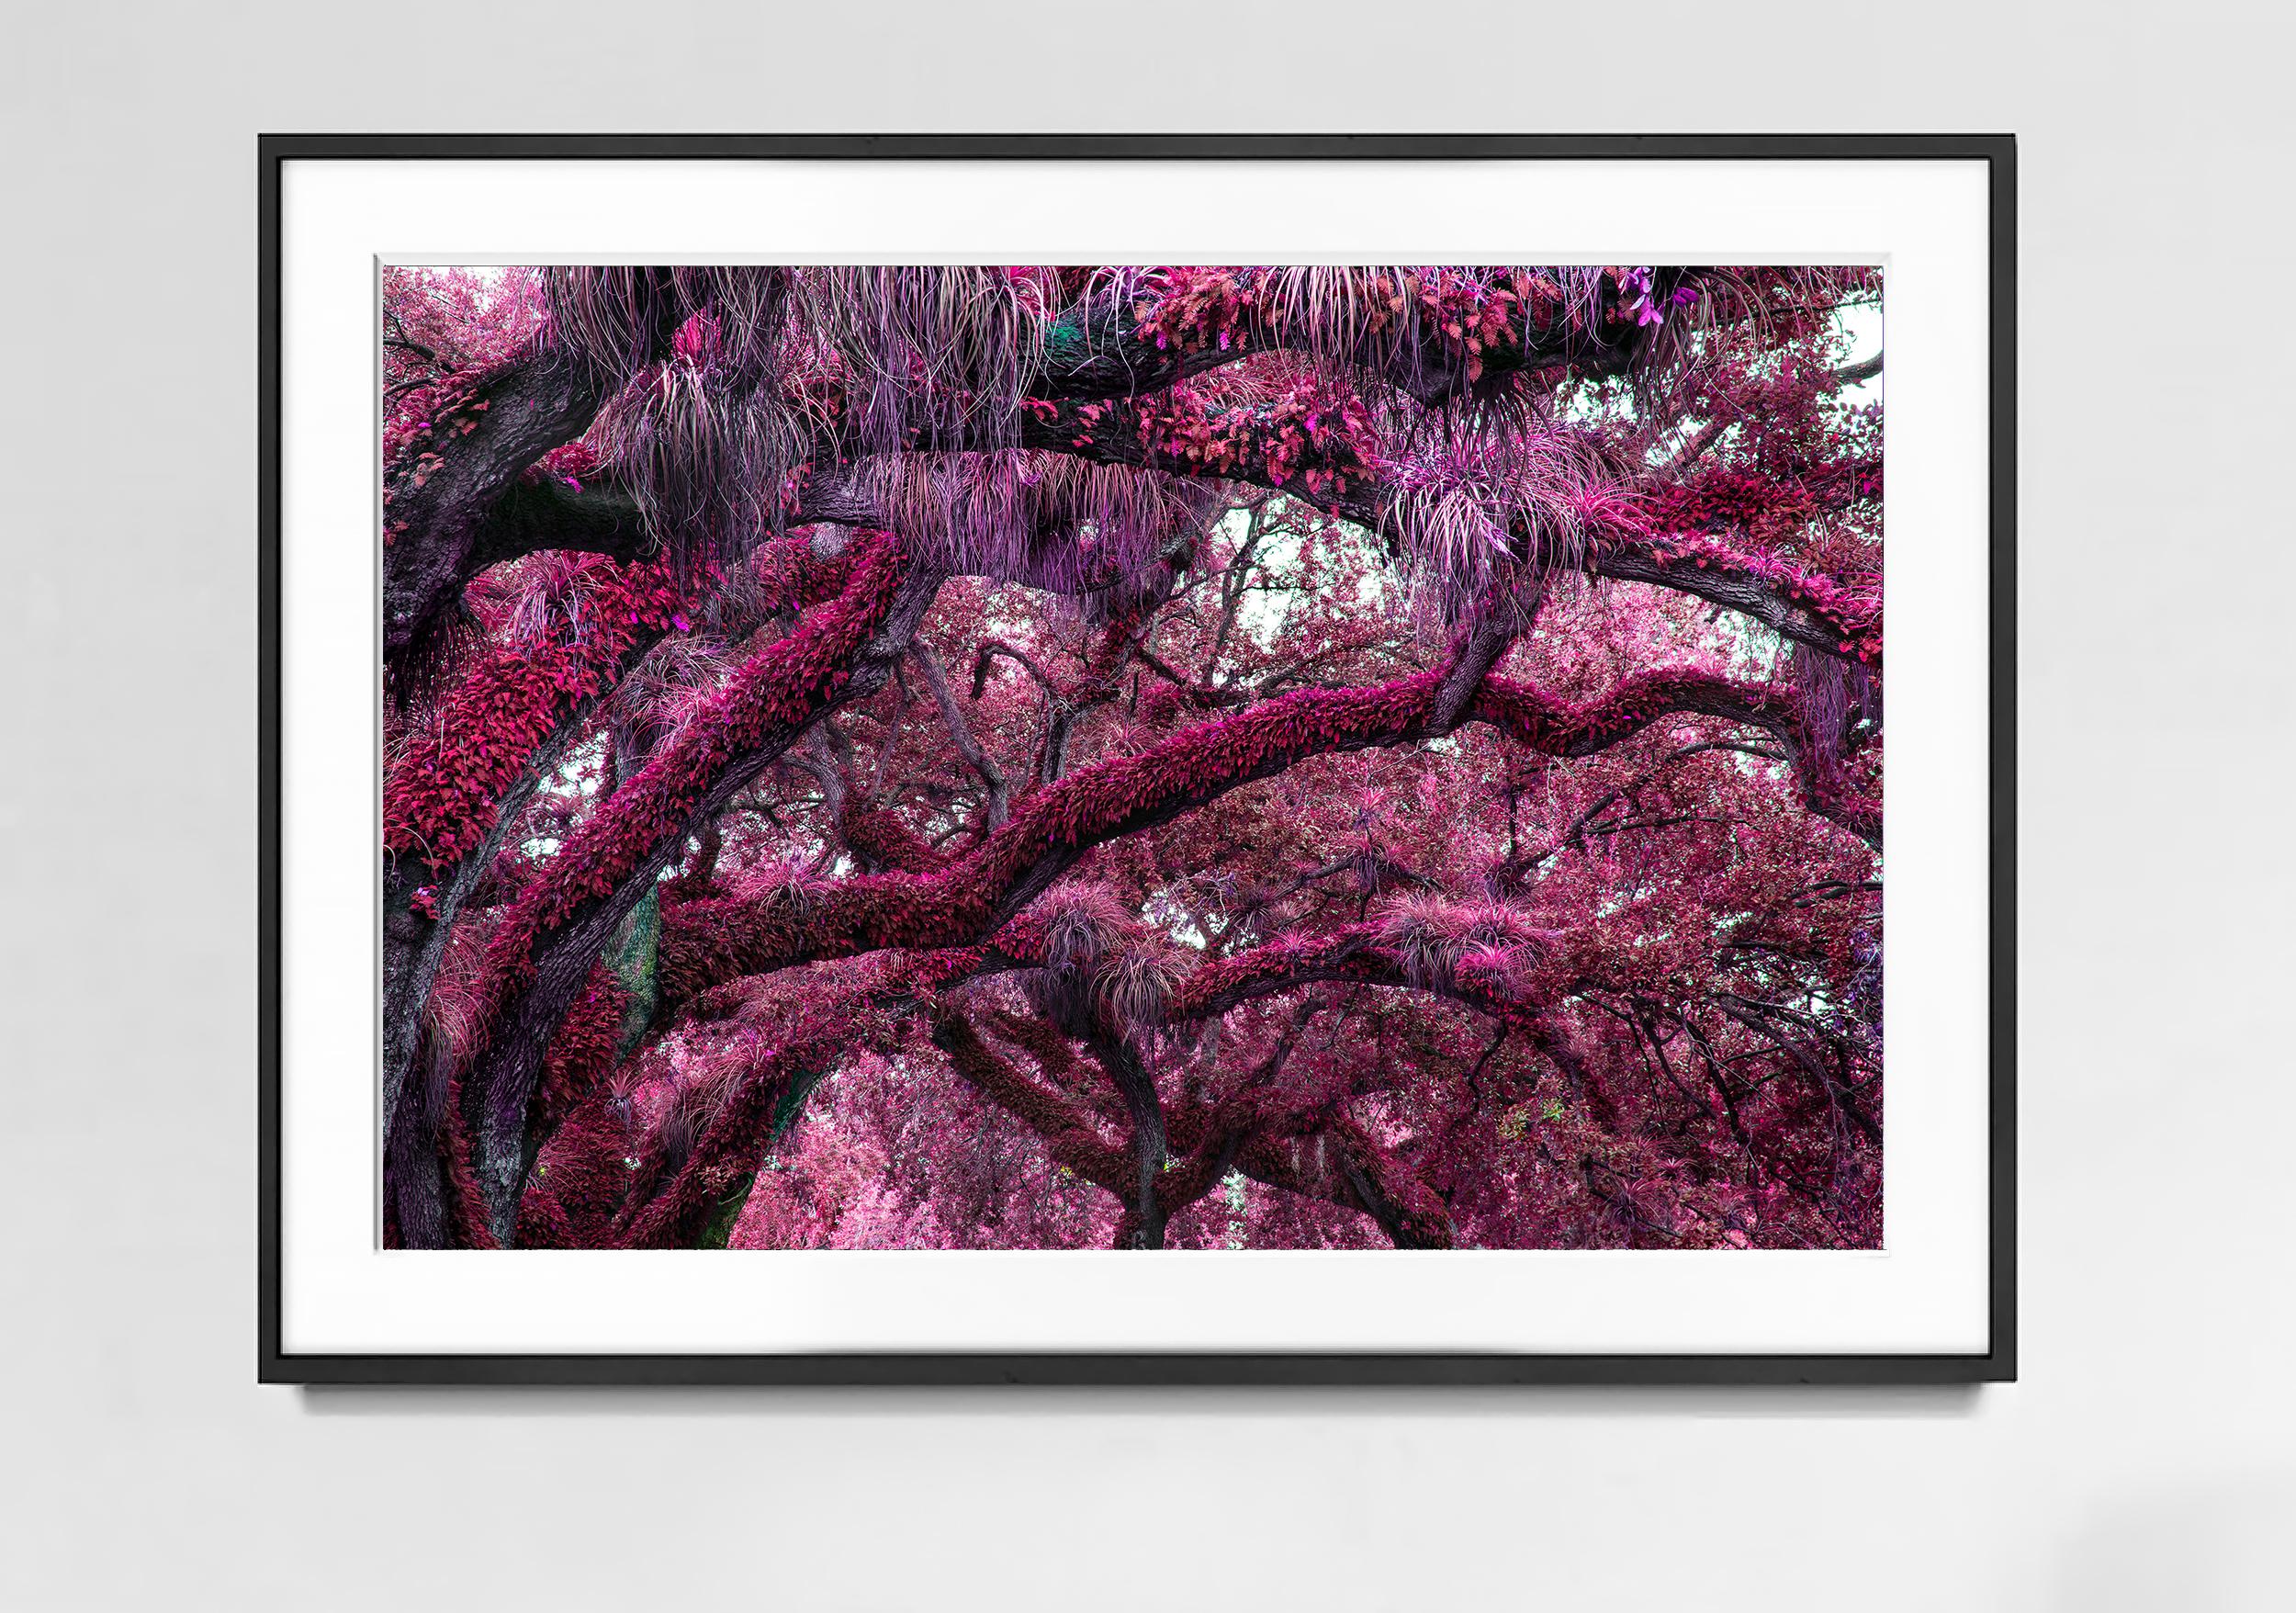 Yummie Trees.  Primal Magenta Earth  - Photograph by Robert Funk